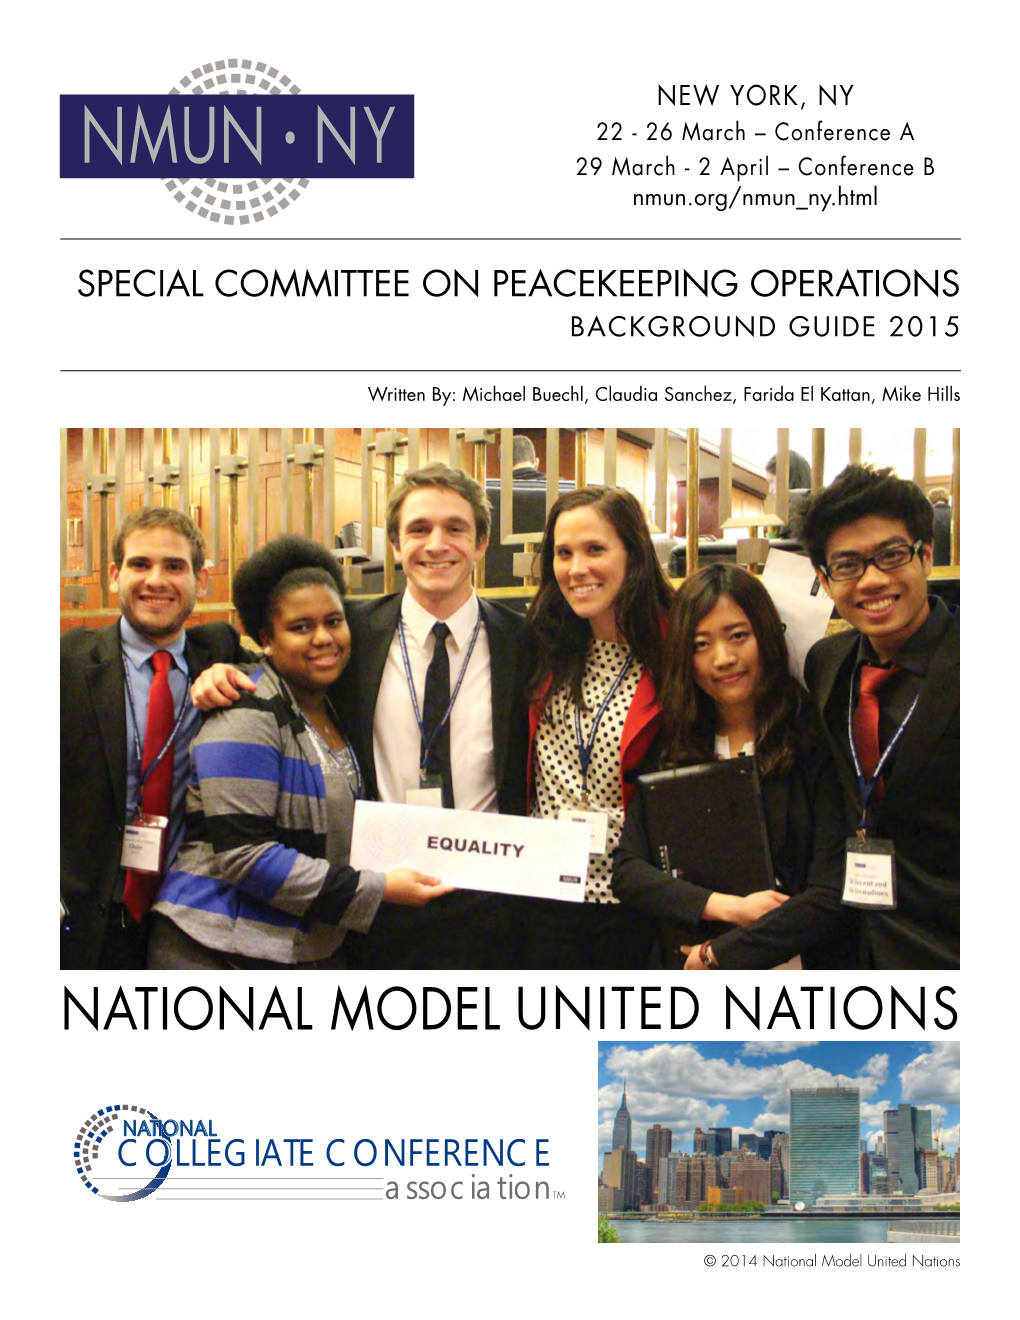 NMUN-NY 2015 Background Guide